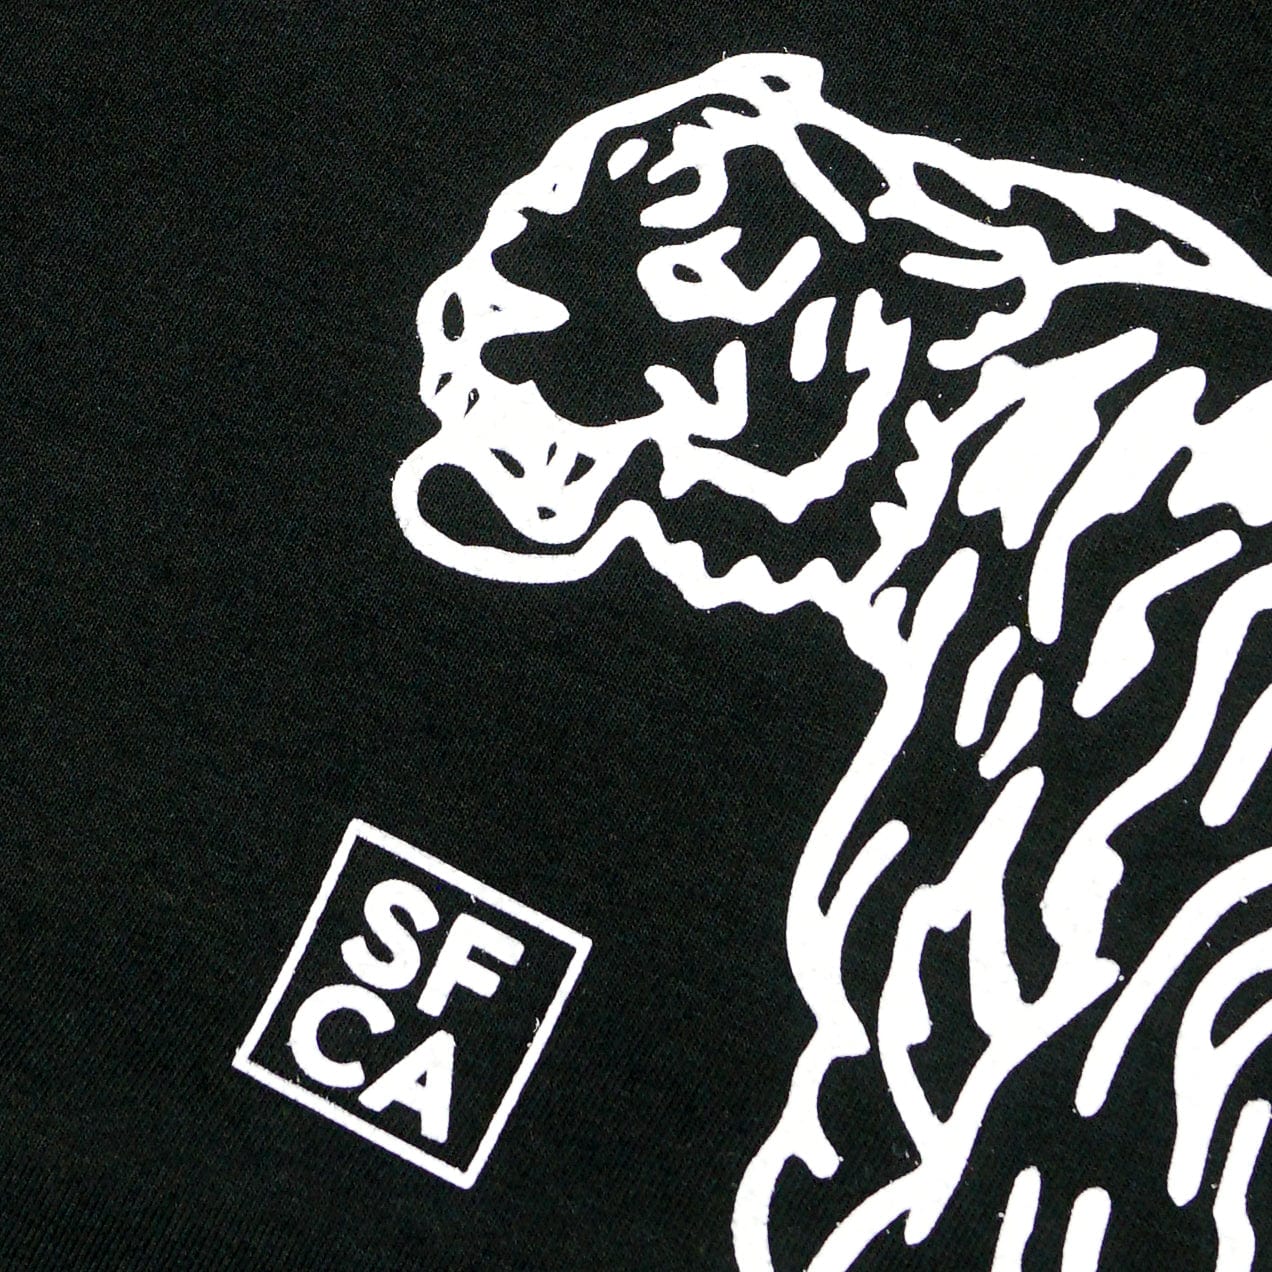 Prowler Tee in black and white - State Of Flux - State Of Flux